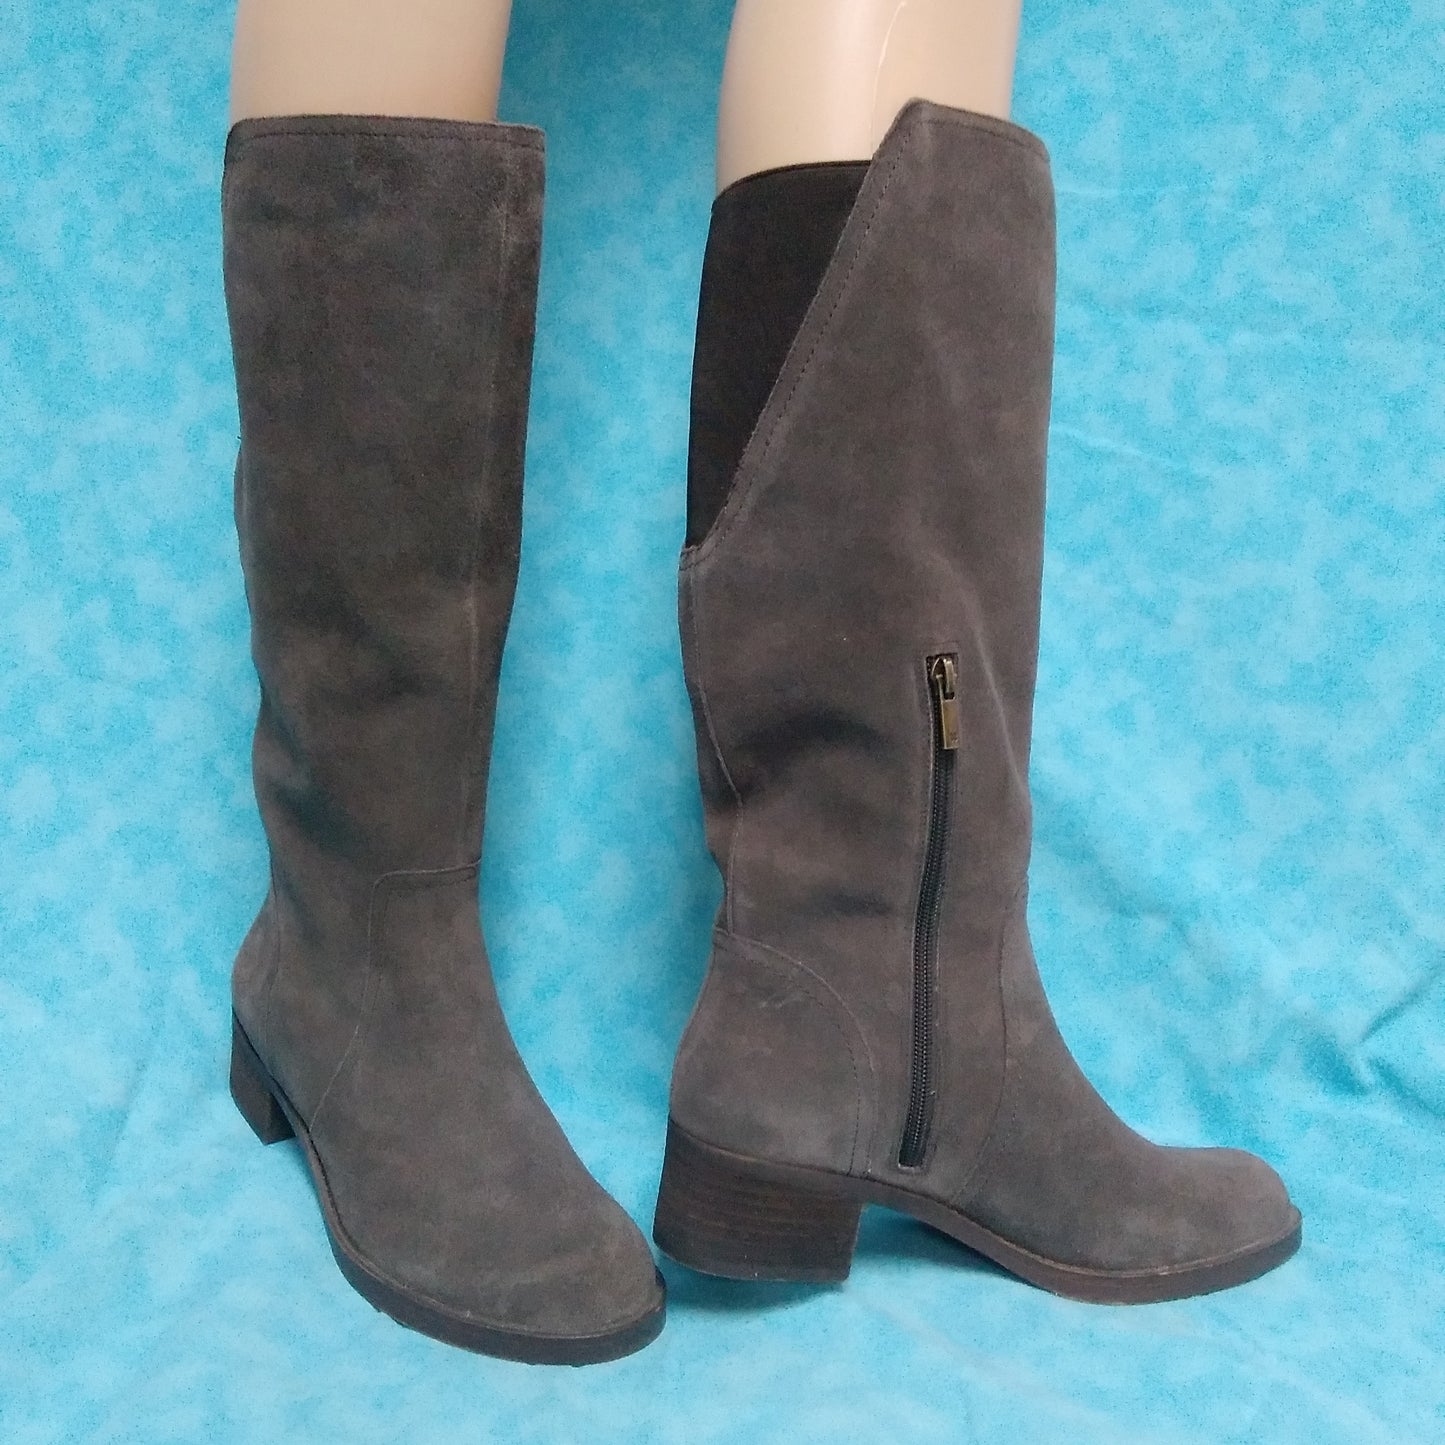 Lucky Brand - Women's Brown Hanover Suede Riding Under Knee Boots - Size: 8.5M